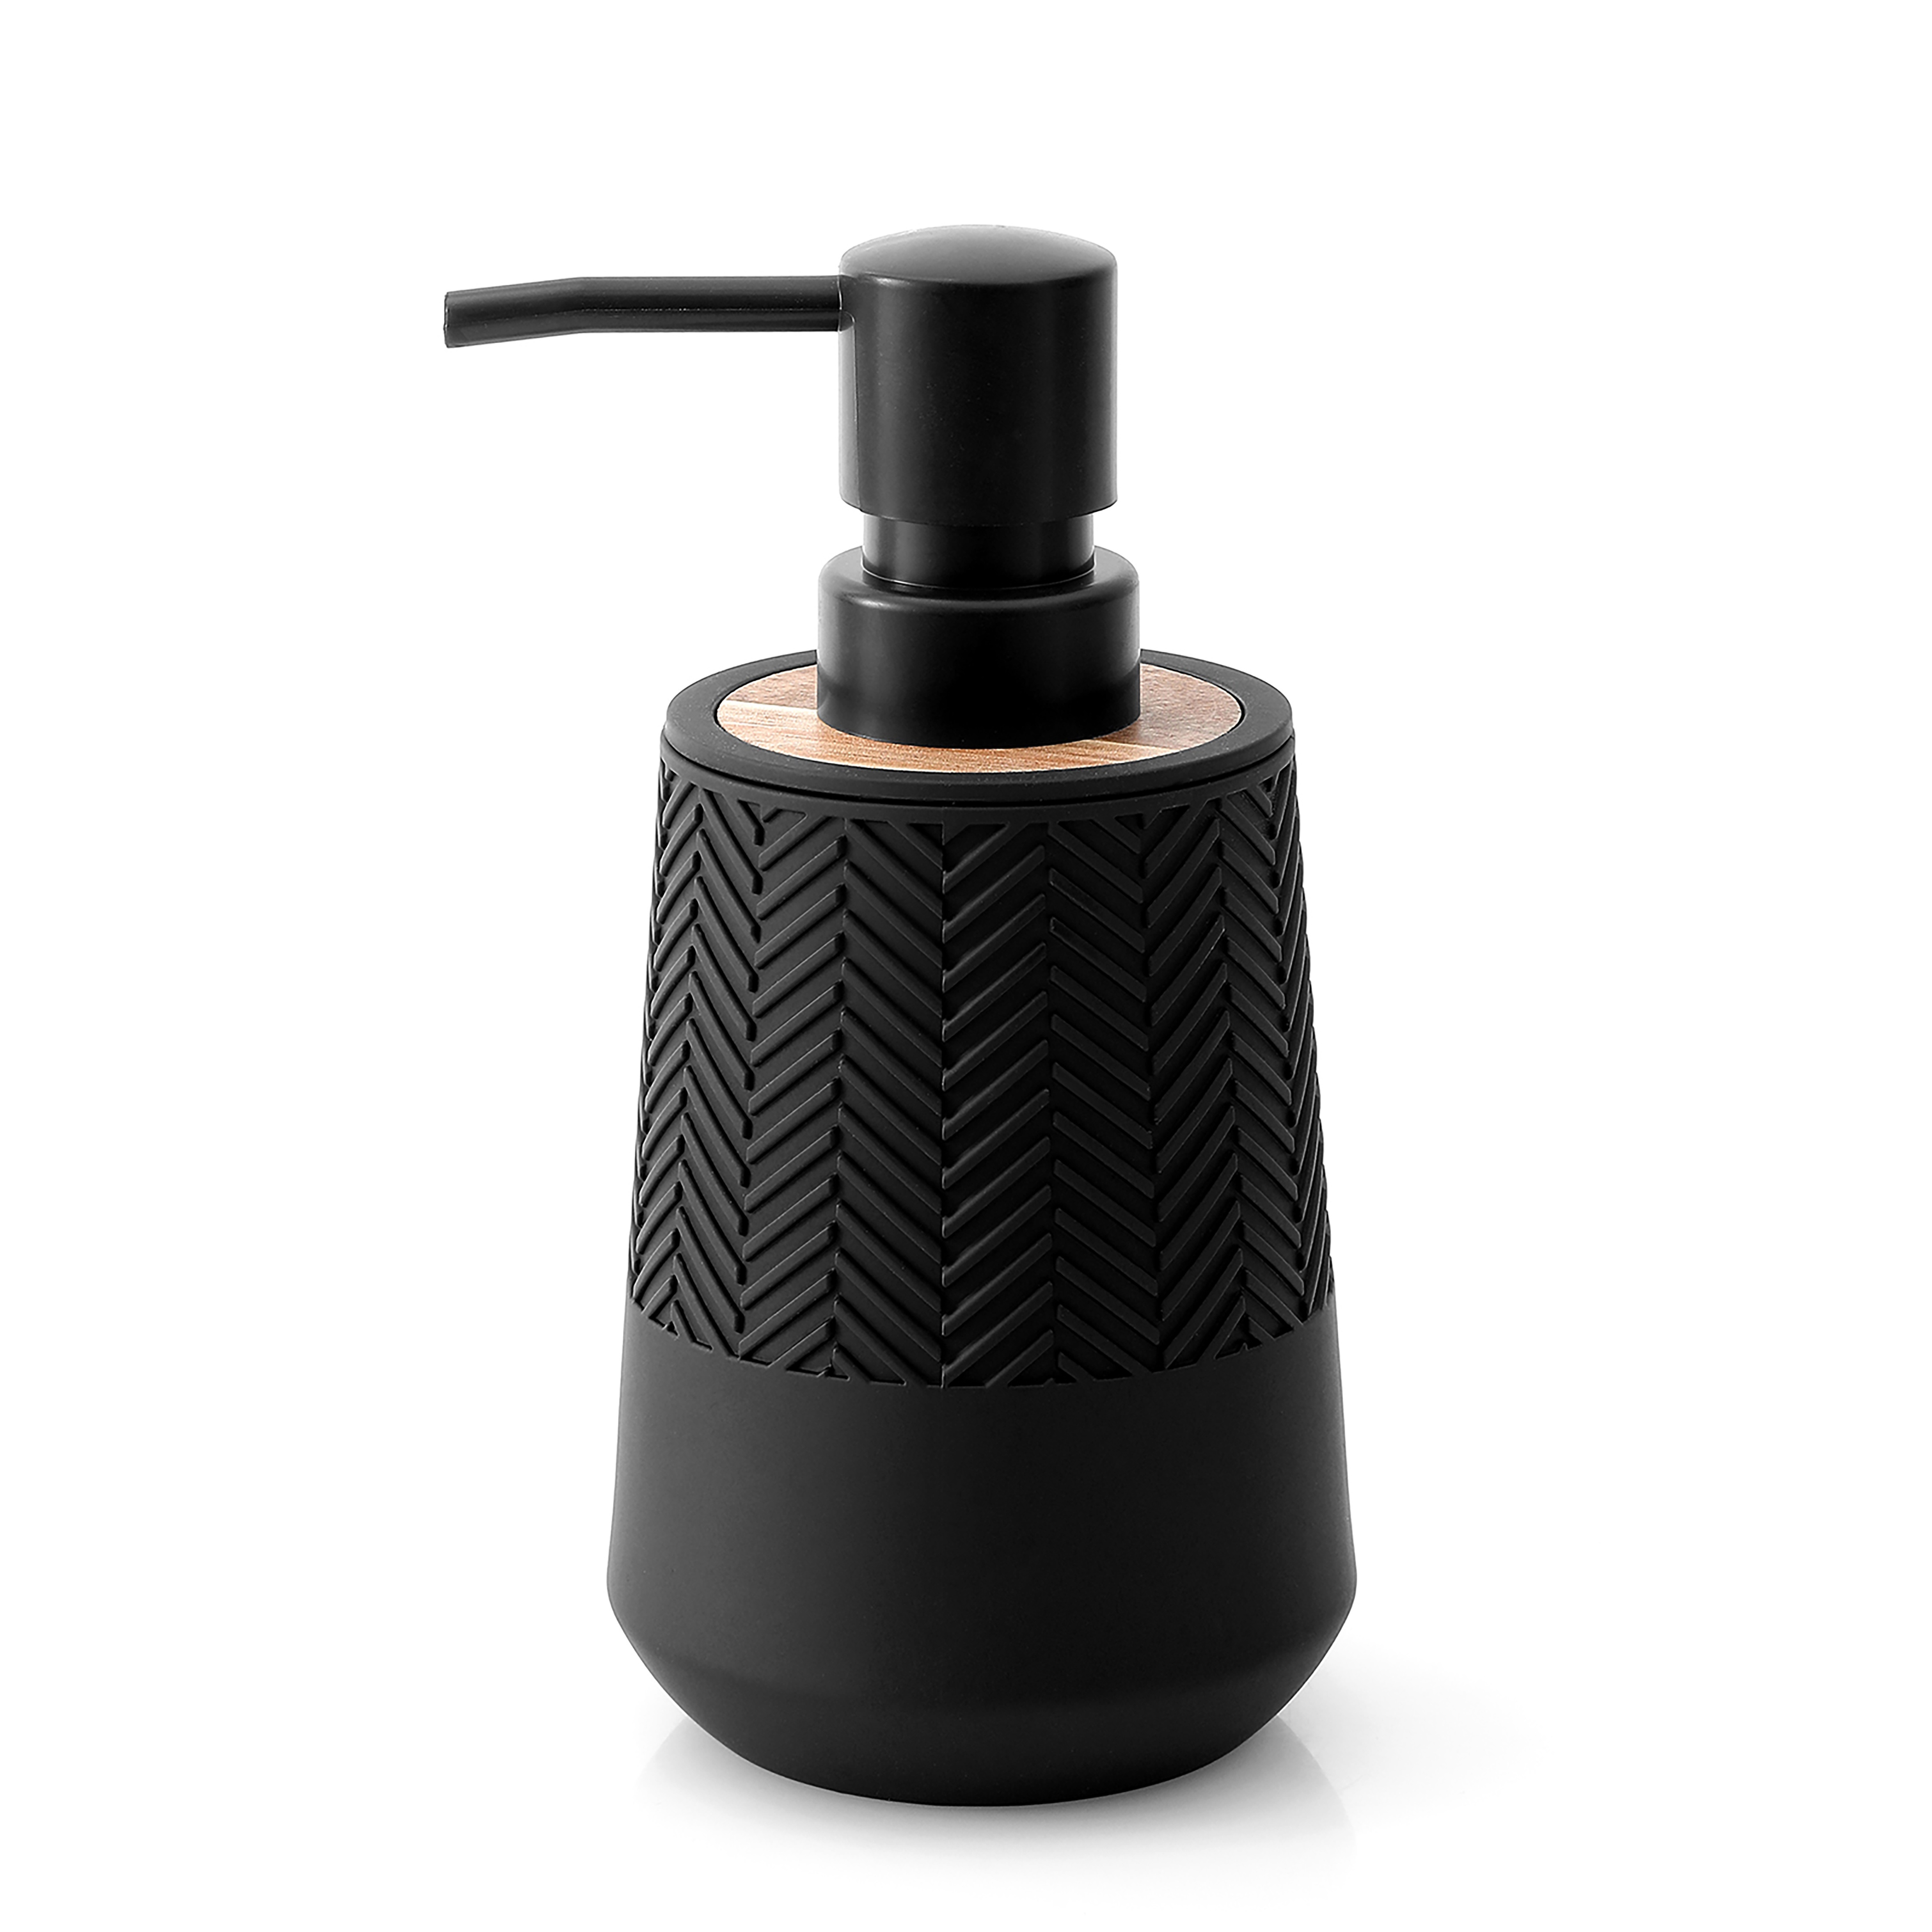 

1pc Black Textured Soap Dispenser With Bamboo Accent, 280ml/9oz, Ideal For Kitchen & Bathroom, Countertop Soap Dispenser